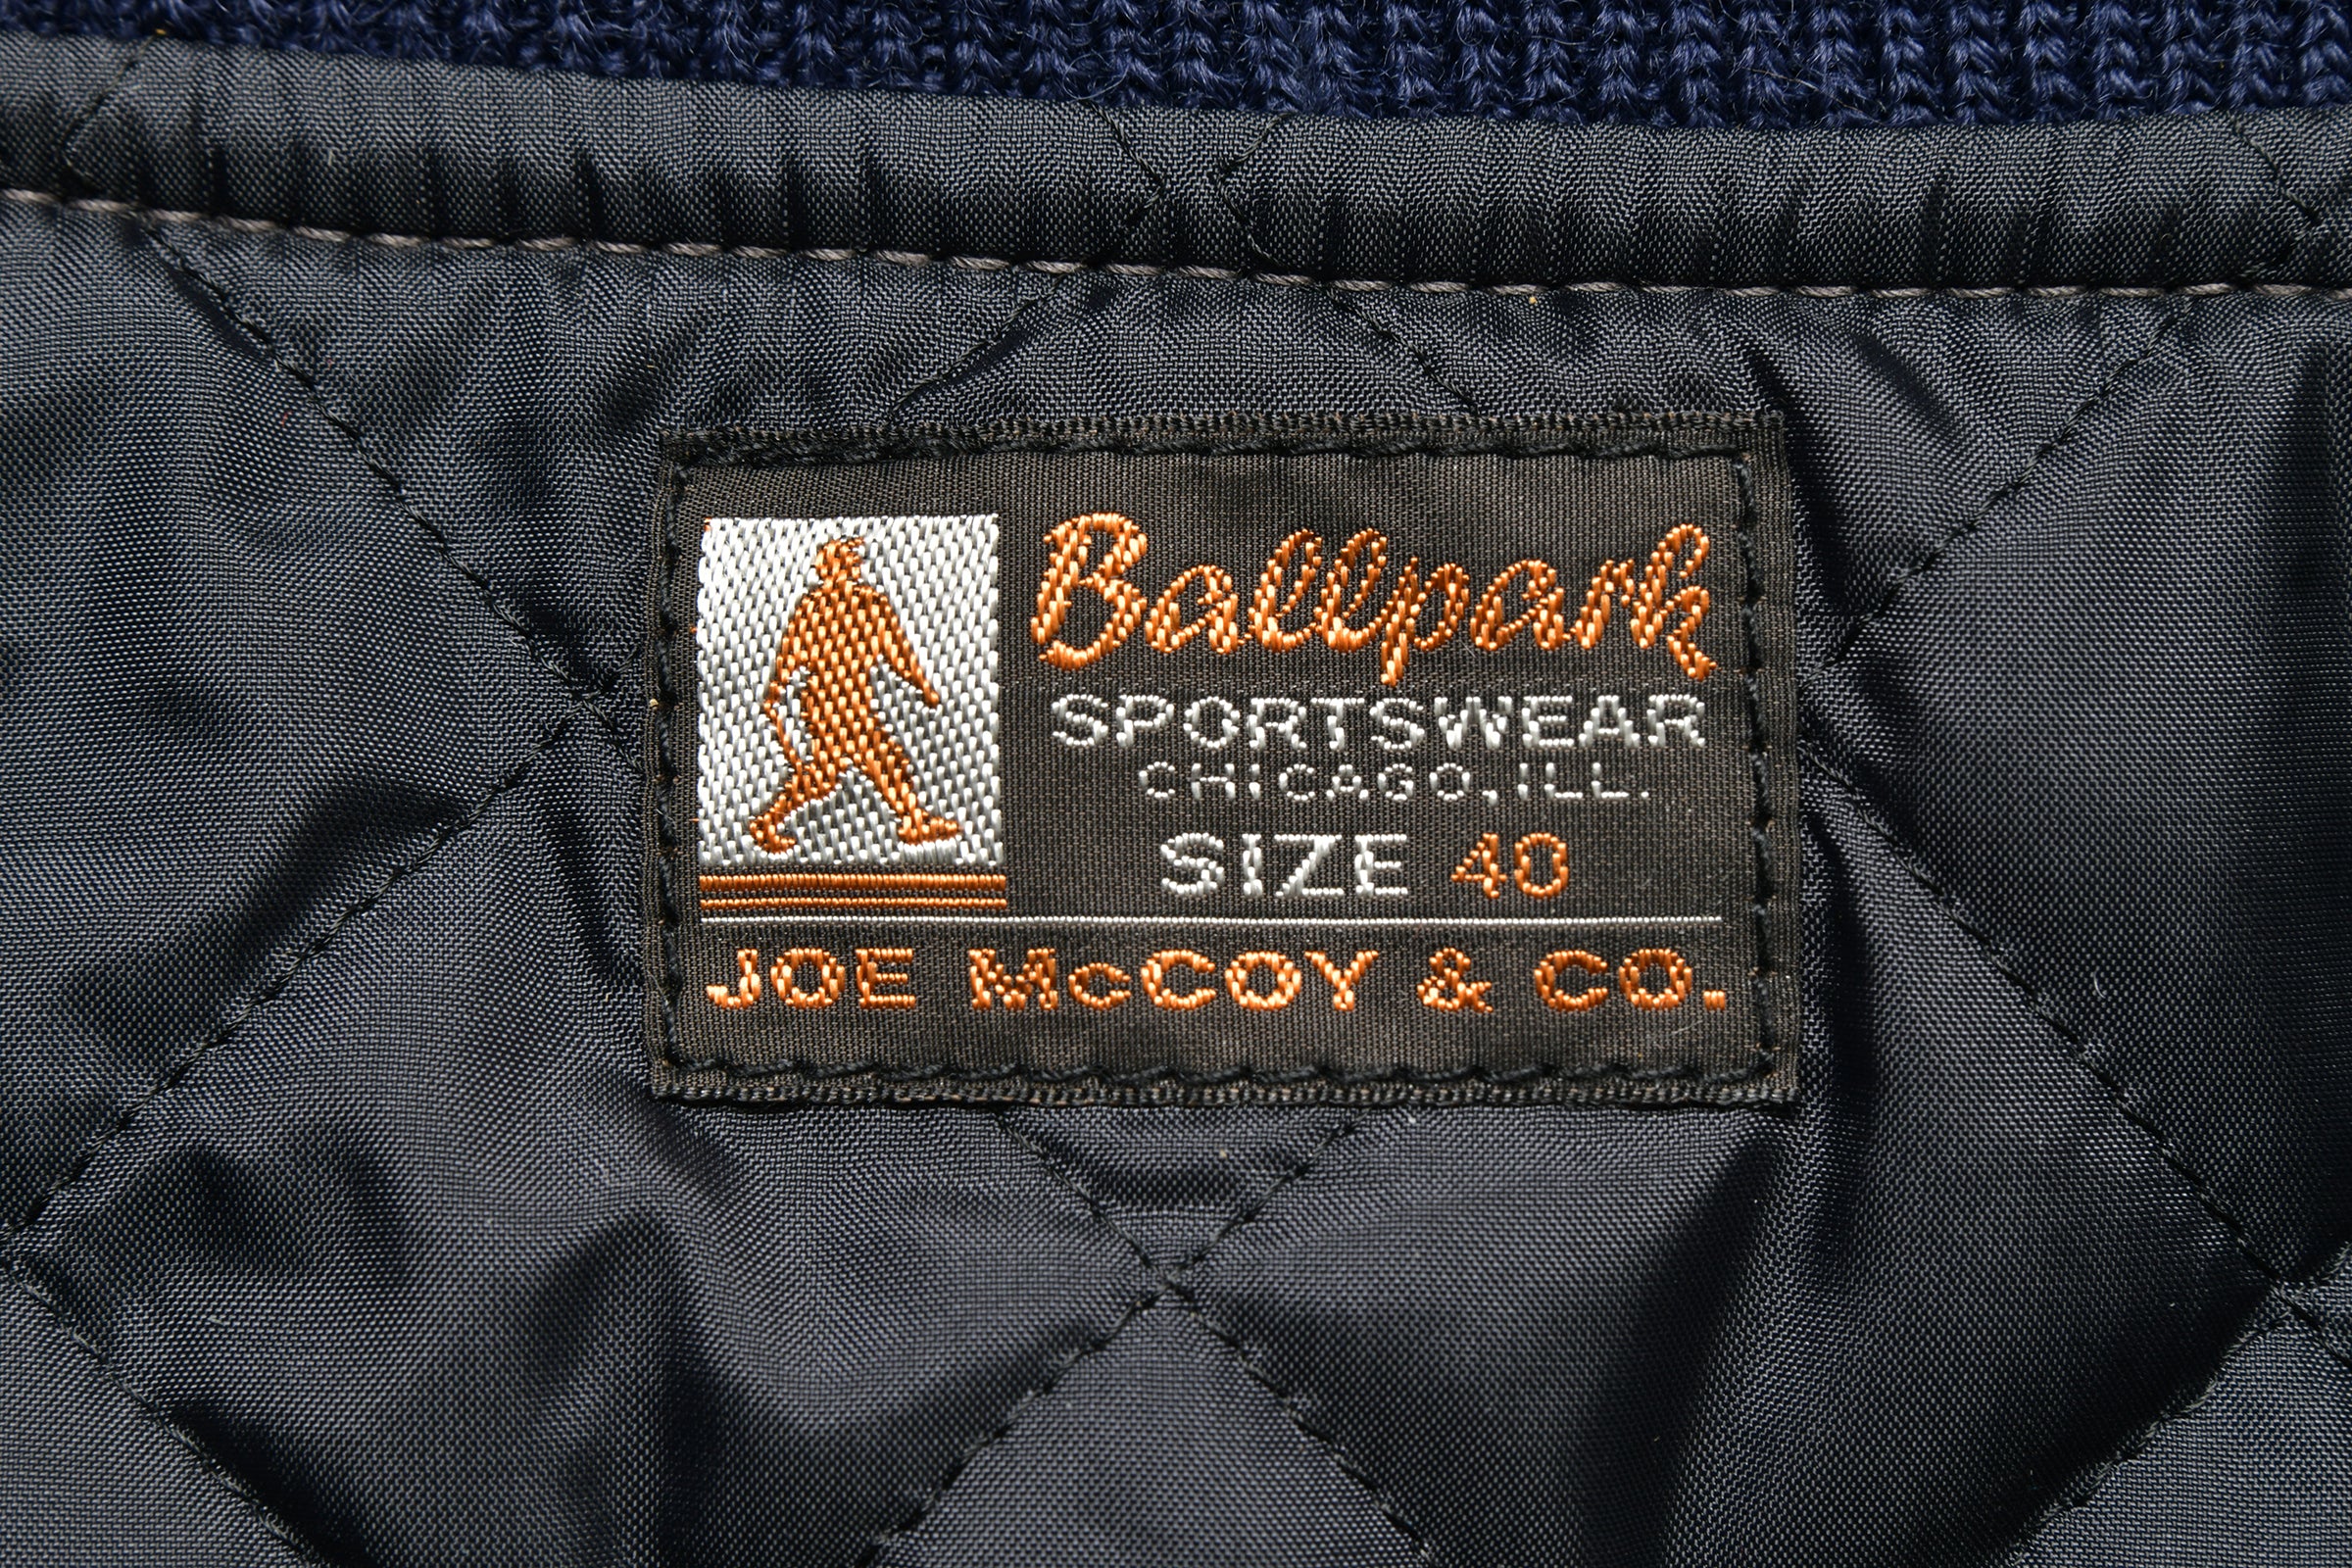 The Real McCoy's Wool Varsity Jacket Midnight Blue – Frans Boone Store